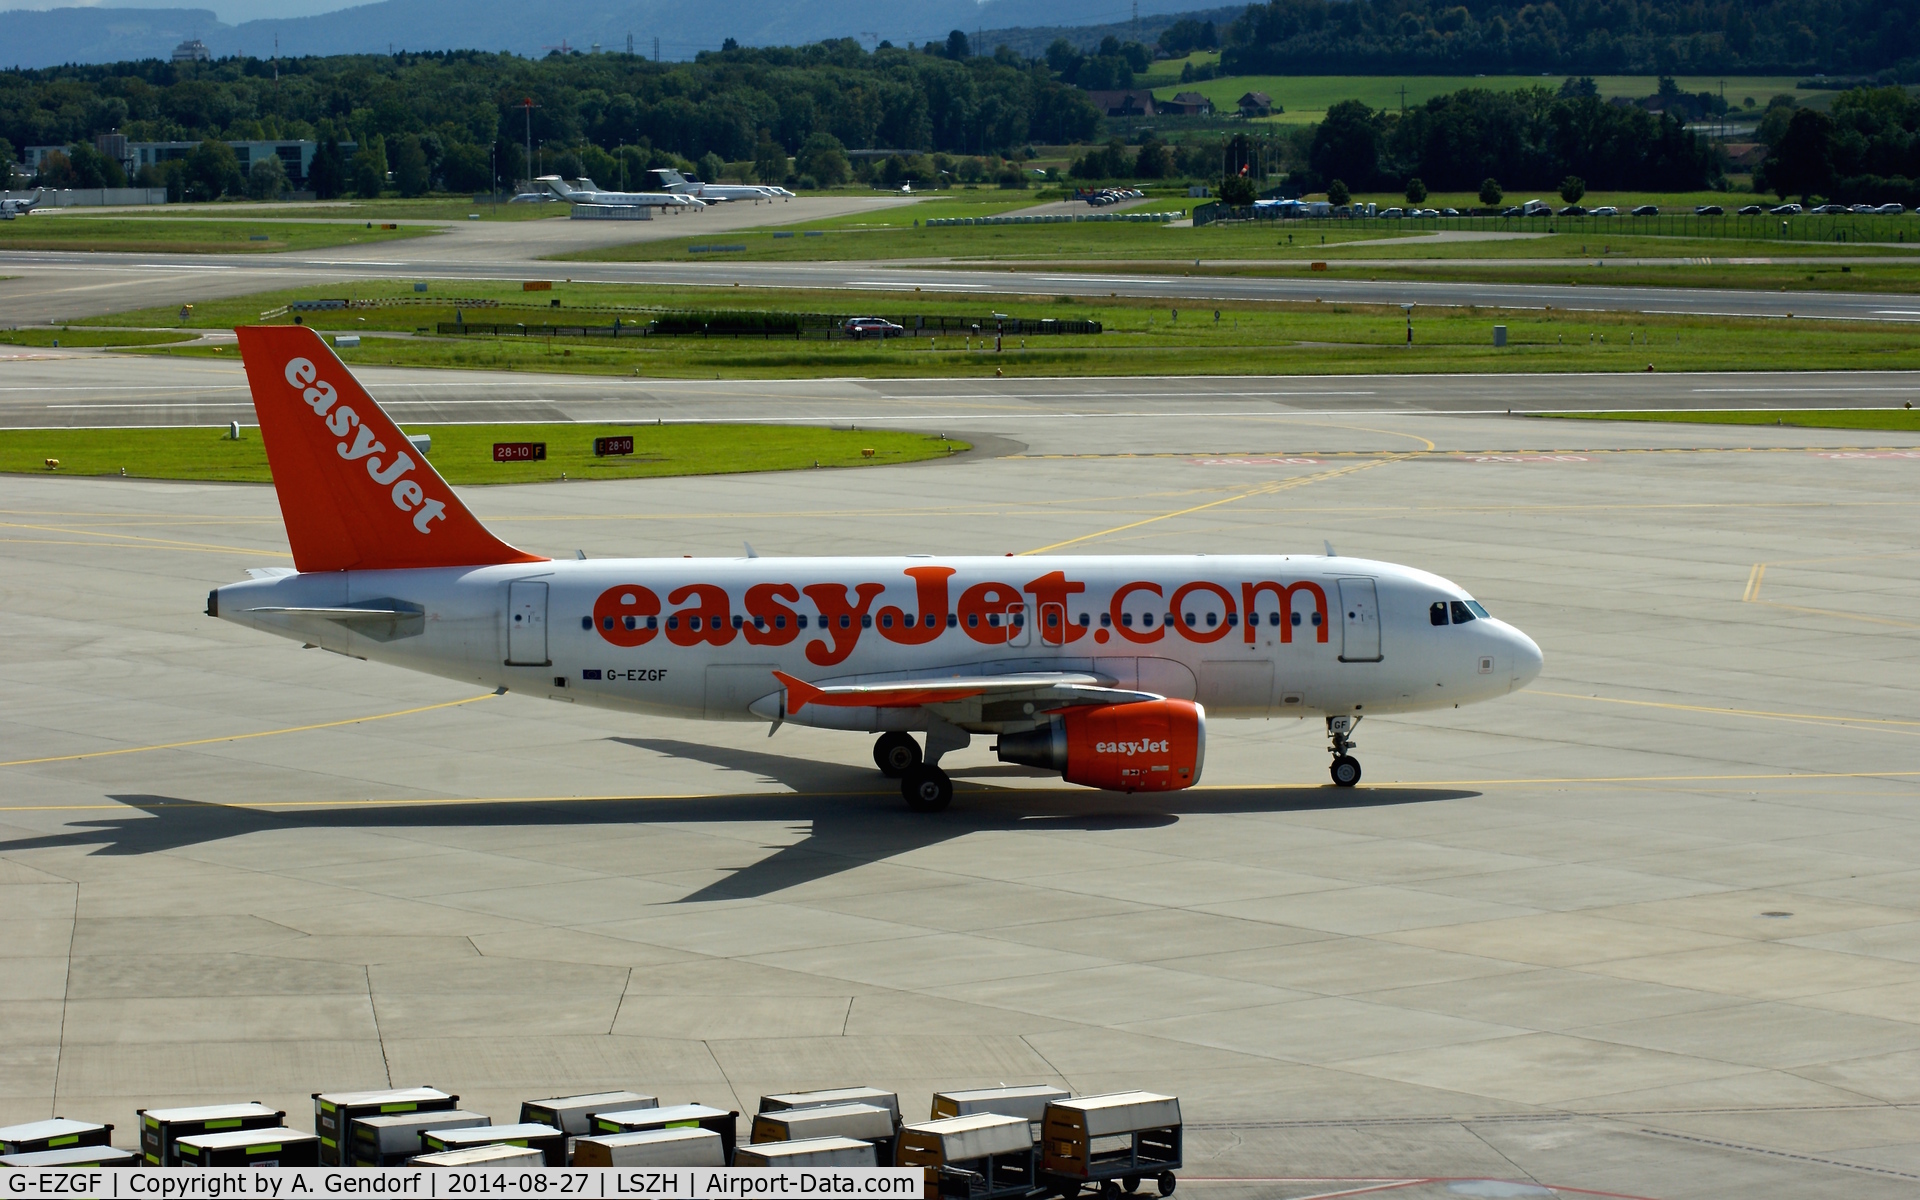 G-EZGF, 2011 Airbus A319-111 C/N 4635, Easy Jet, seen here taxiing in front of Dock E at Zürich-Kloten(LSZH)